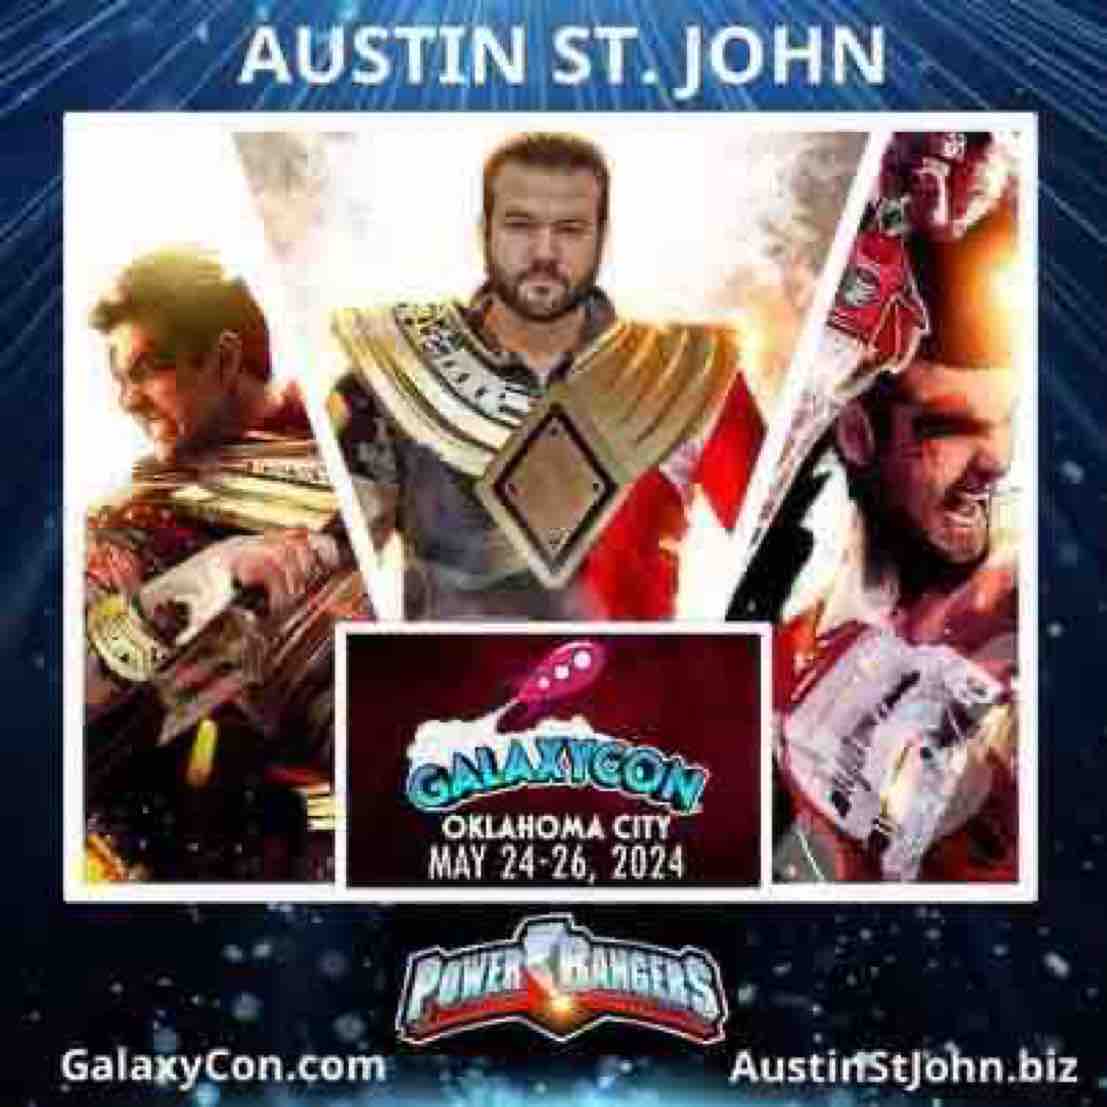 It’s Morphin Time today at GalaxyCon OKC! I’ll be here all weekend to sign autographs, answer questions, shake hands & take pictures! You can get more info & tickets at the link below. See YOU soon! austinstjohn.komi.io #powerrangers #mmpr #rangertoreaper #redempt1on